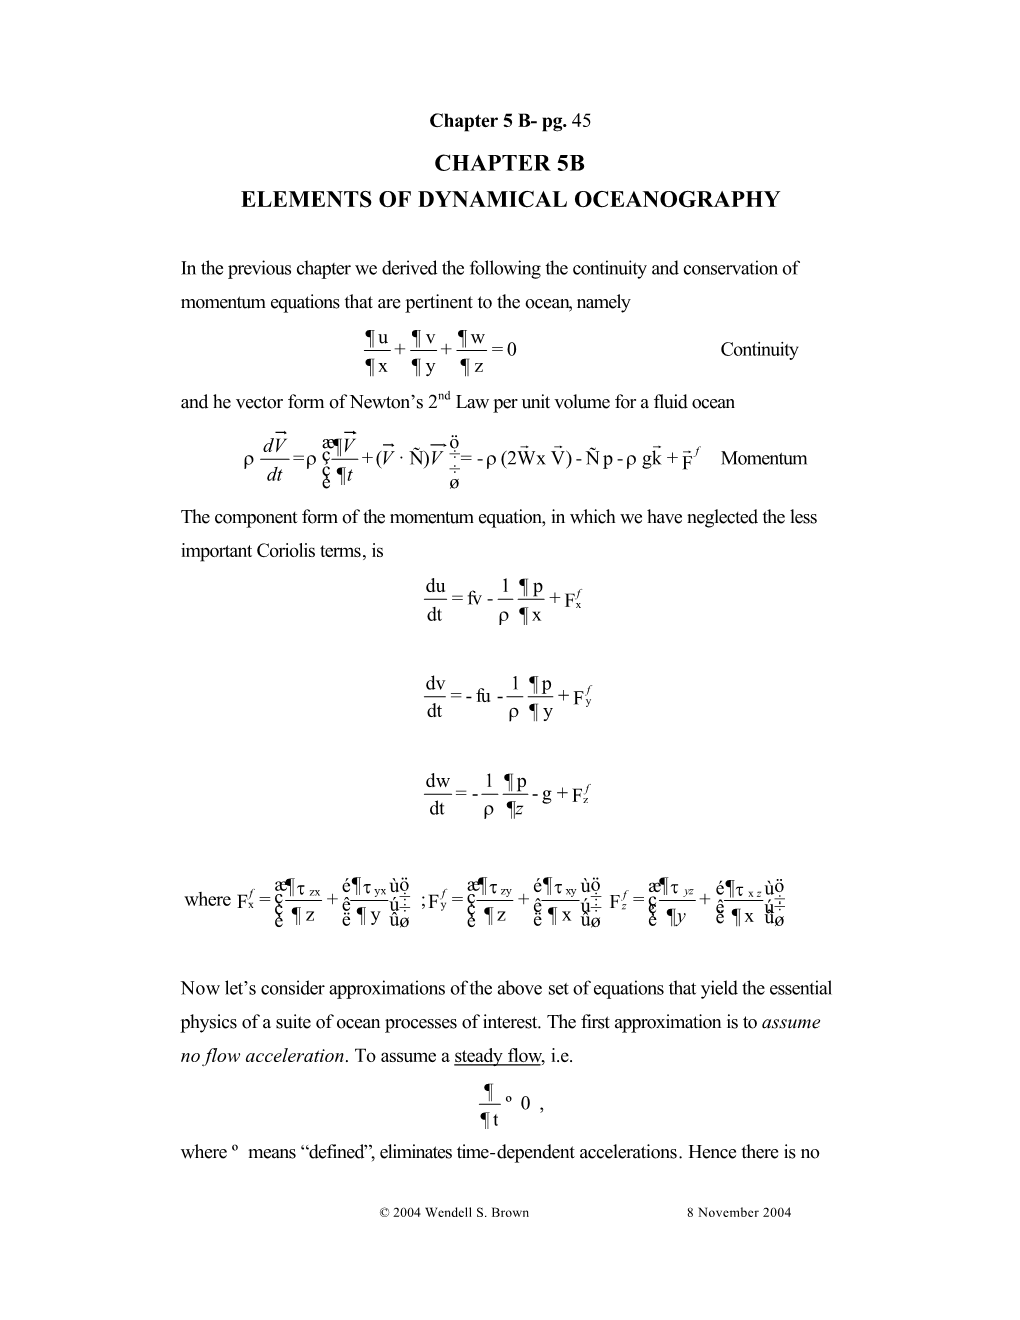 Chapter 5B Elements of Dynamical Oceanography